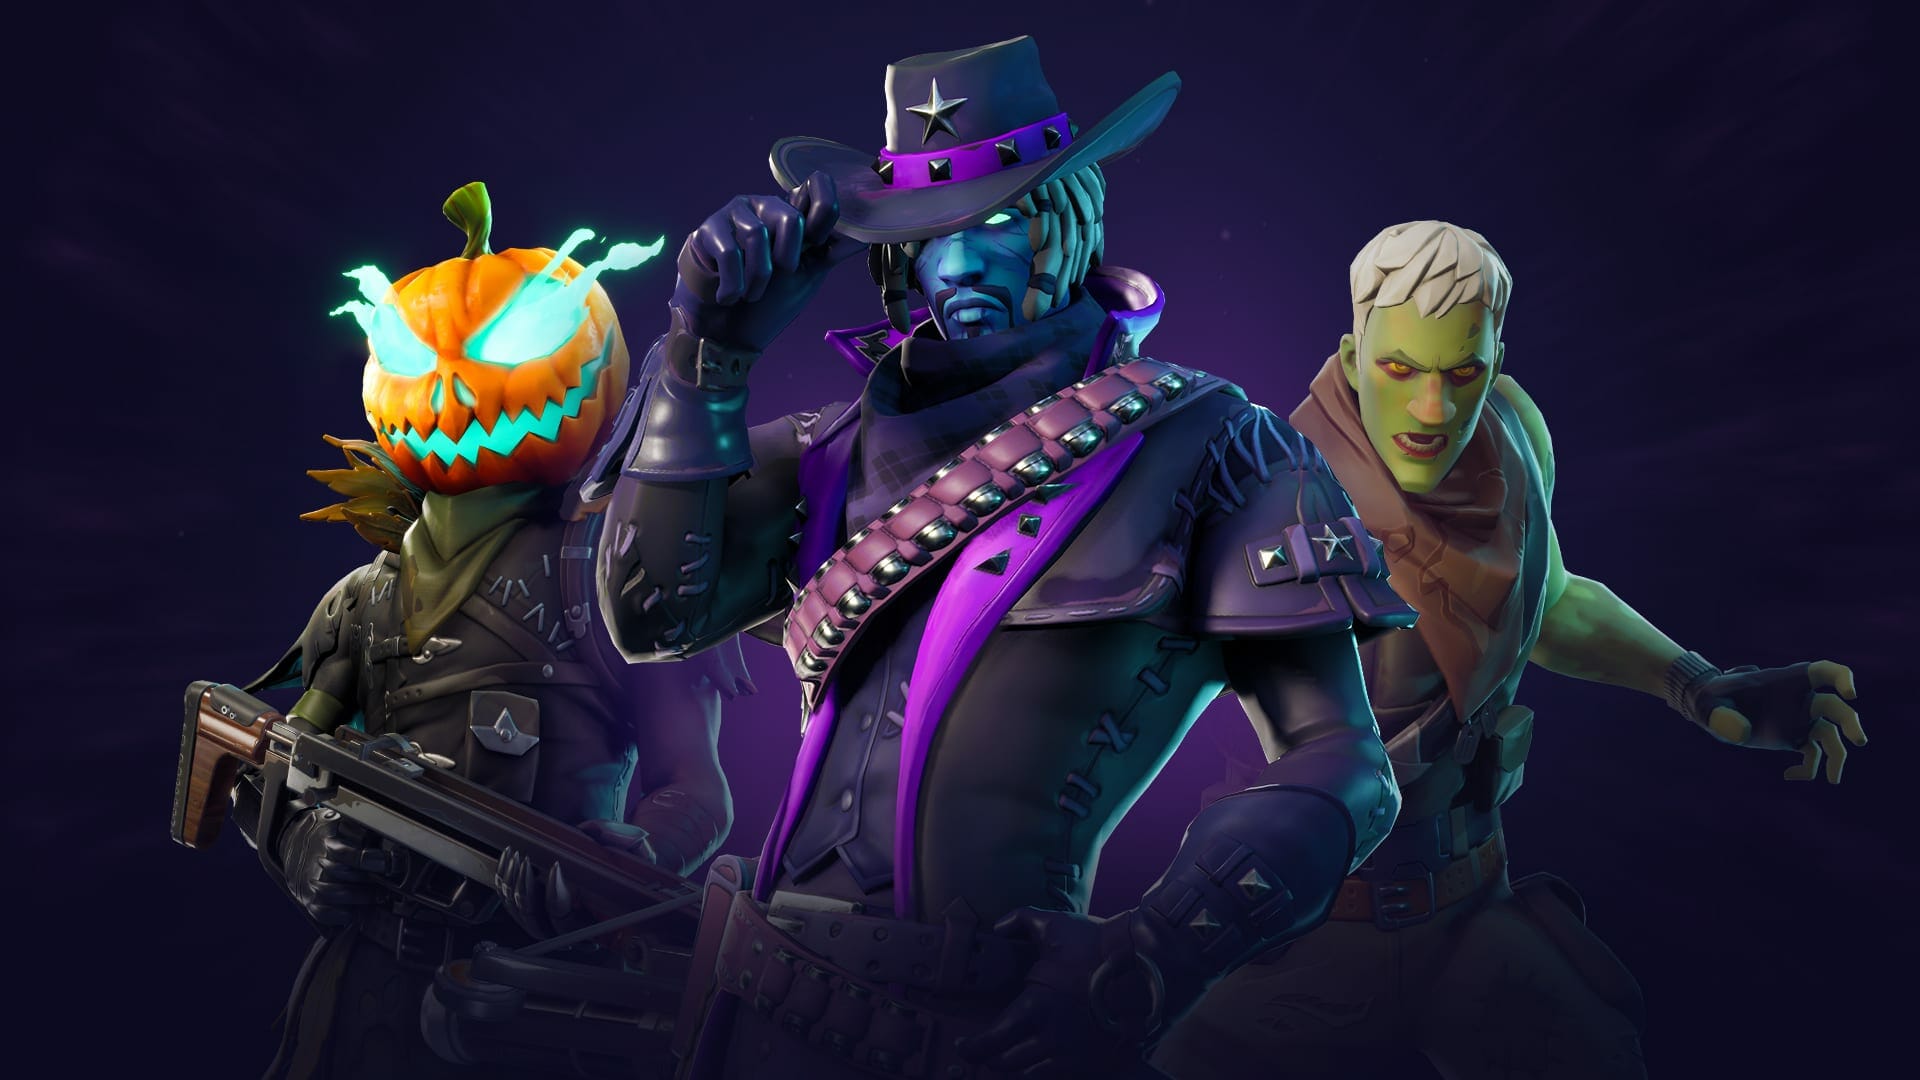 fortnite 6 20 patch leaked items and events halloween lobby cosmetics and emotes - fbr fortnite twitter